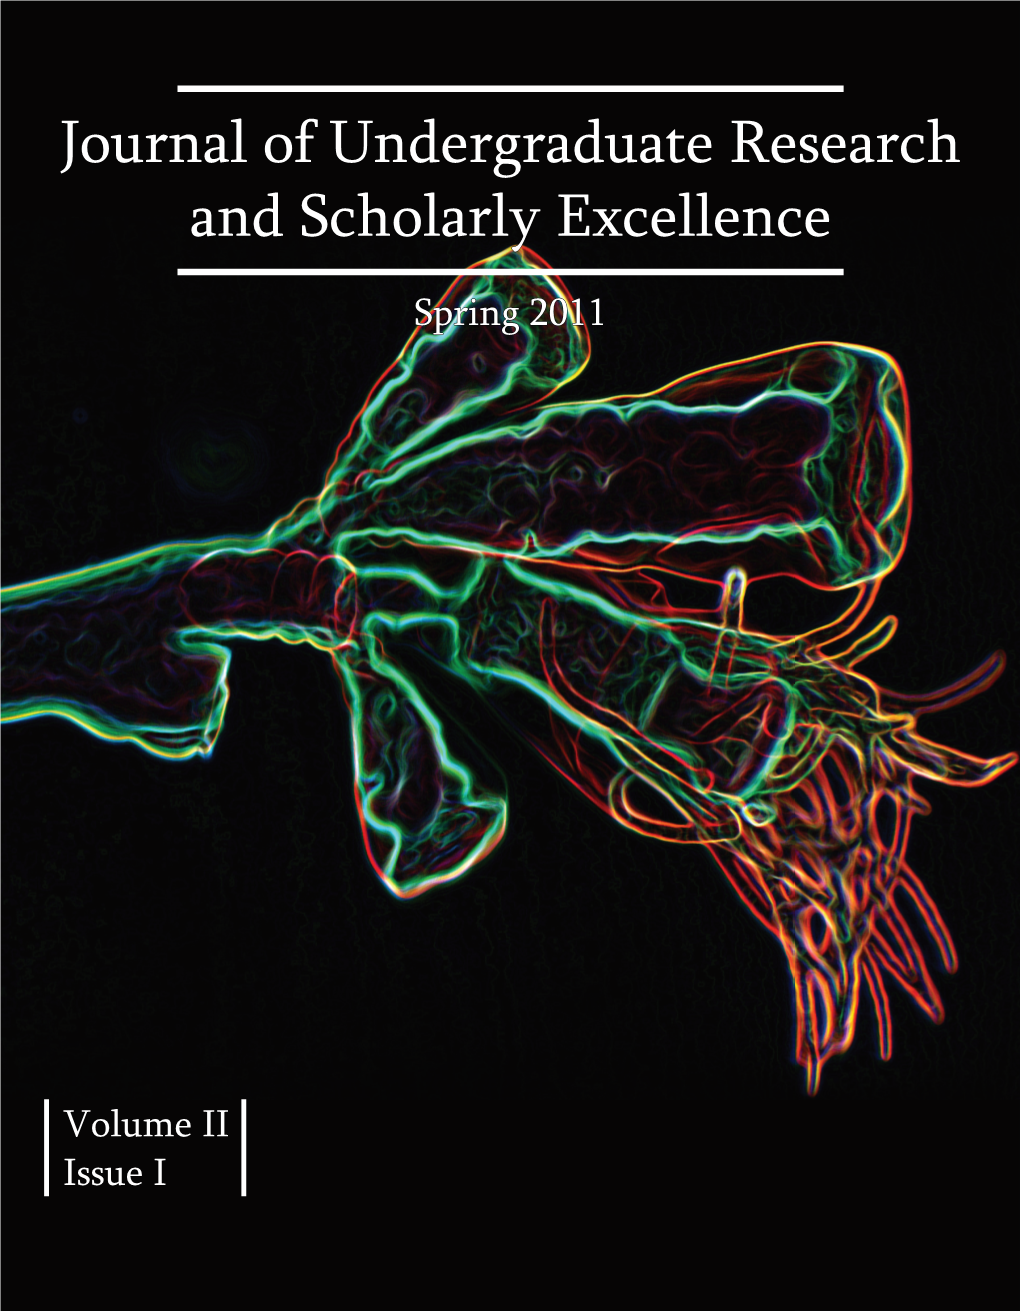 Journal of Undergraduate Research and Scholarly Excellence